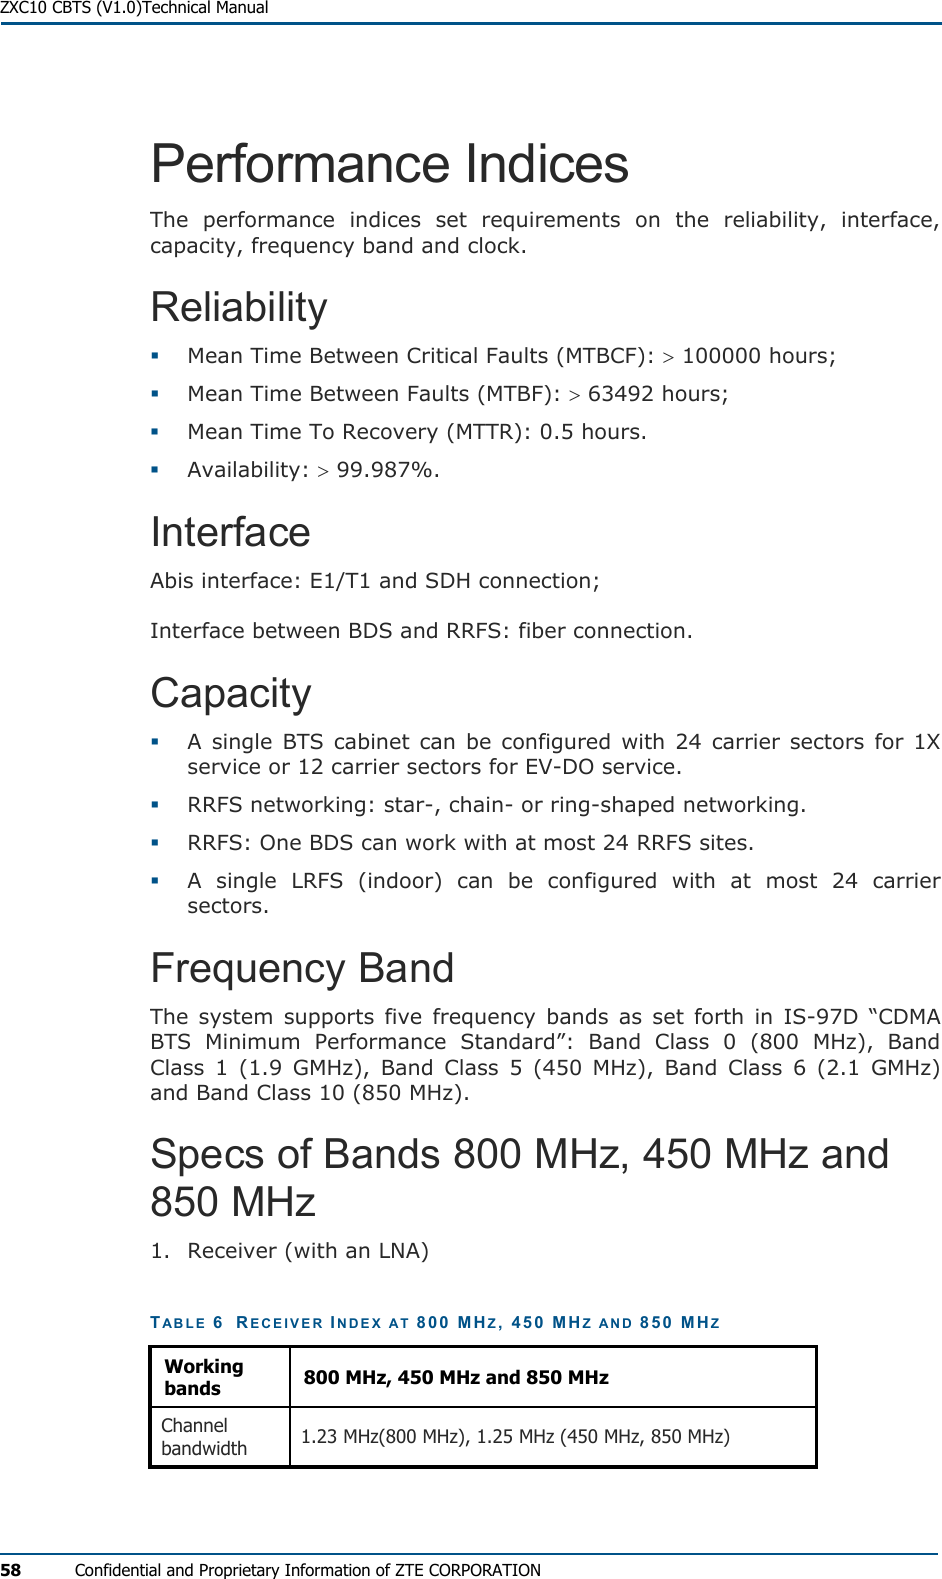  ZXC10 CBTS (V1.0)Technical Manual 58  Confidential and Proprietary Information of ZTE CORPORATION Performance Indices  The performance indices set requirements on the reliability, interface, capacity, frequency band and clock. Reliability   Mean Time Between Critical Faults (MTBCF): &gt; 100000 hours;    Mean Time Between Faults (MTBF): &gt; 63492 hours;   Mean Time To Recovery (MTTR): 0.5 hours.   Availability: &gt; 99.987%. Interface Abis interface: E1/T1 and SDH connection; Interface between BDS and RRFS: fiber connection. Capacity   A single BTS cabinet can be configured with 24 carrier sectors for 1X service or 12 carrier sectors for EV-DO service.    RRFS networking: star-, chain- or ring-shaped networking.    RRFS: One BDS can work with at most 24 RRFS sites.    A single LRFS (indoor) can be configured with at most 24 carrier sectors.  Frequency Band The system supports five frequency bands as set forth in IS-97D “CDMA BTS Minimum Performance Standard”: Band Class 0 (800 MHz), Band Class 1 (1.9 GMHz), Band Class 5 (450 MHz), Band Class 6 (2.1 GMHz) and Band Class 10 (850 MHz).  Specs of Bands 800 MHz, 450 MHz and 850 MHz 1.  Receiver (with an LNA) TABLE 6  RECEIVER INDEX AT 800 MHZ, 450 MHZ AND 850 MHZ Working bands  800 MHz, 450 MHz and 850 MHz Channel bandwidth  1.23 MHz(800 MHz), 1.25 MHz (450 MHz, 850 MHz) 